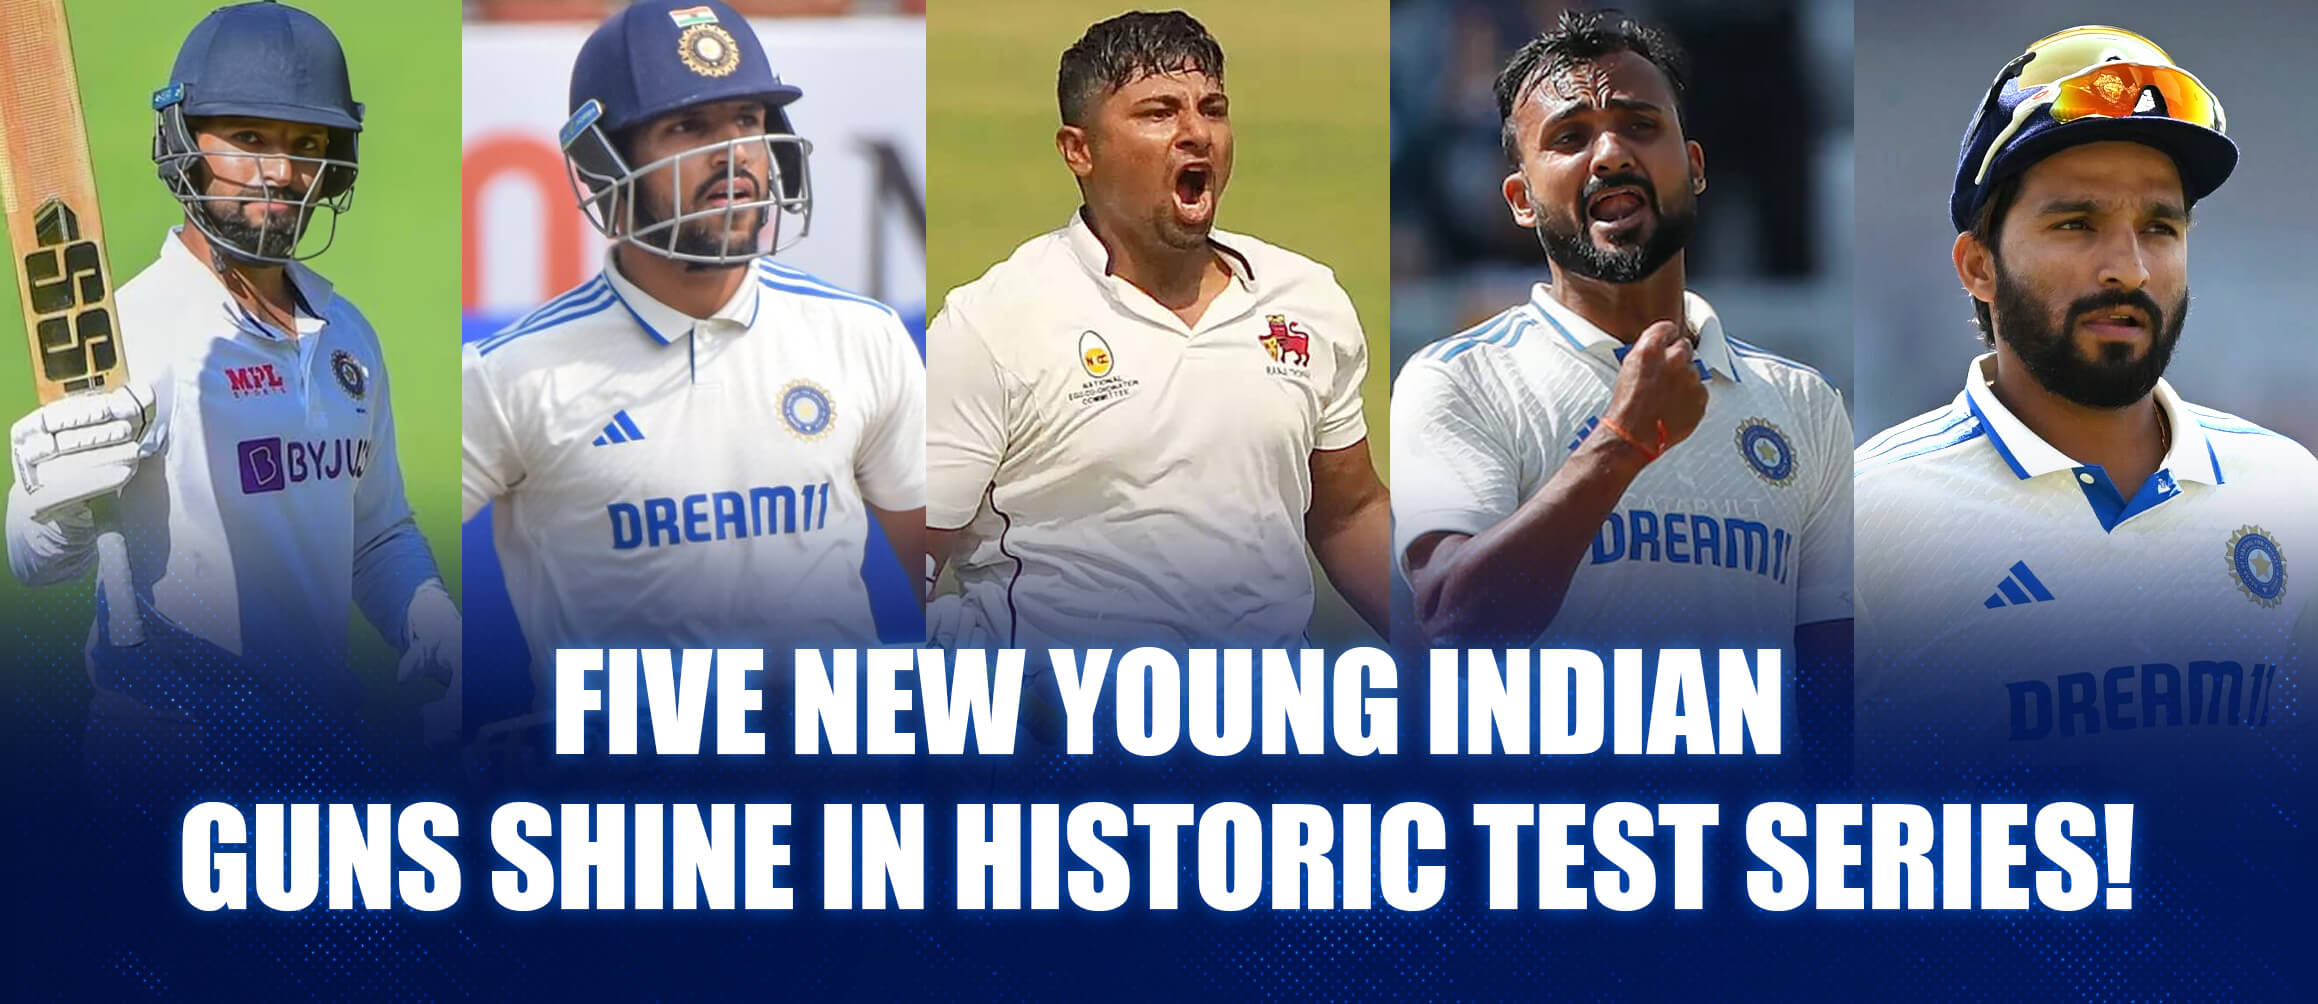 Five New Young Indian Guns Shine in Historic Test Series!